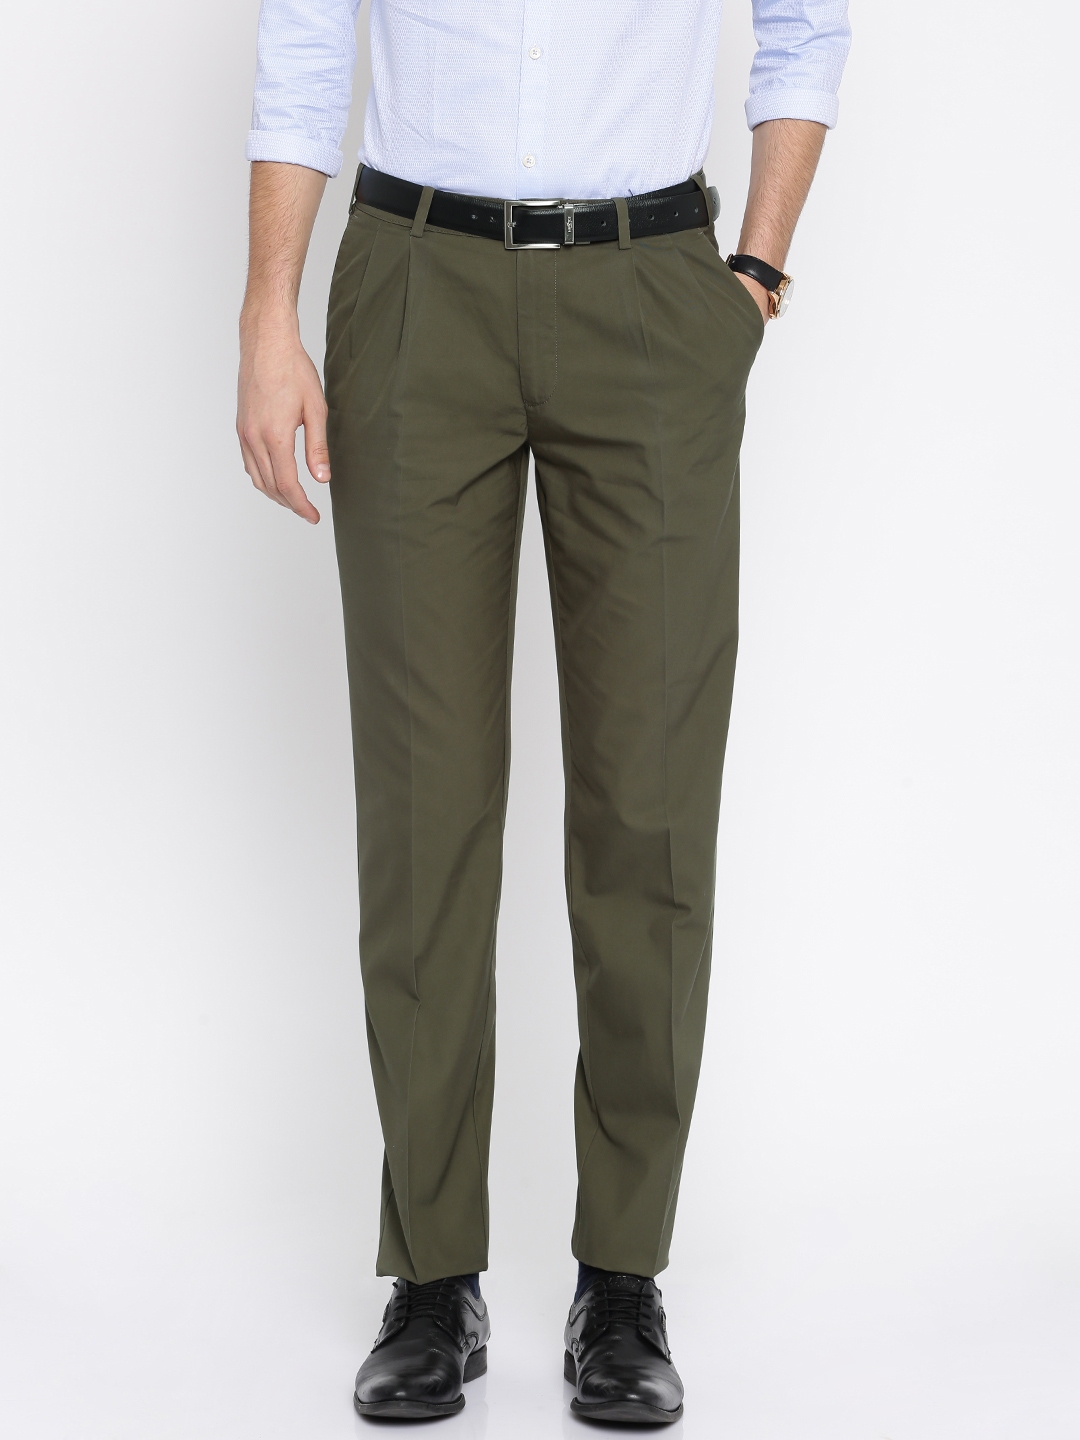 Buy Online Women Olive Green Solid Trousers at best price  Plussin